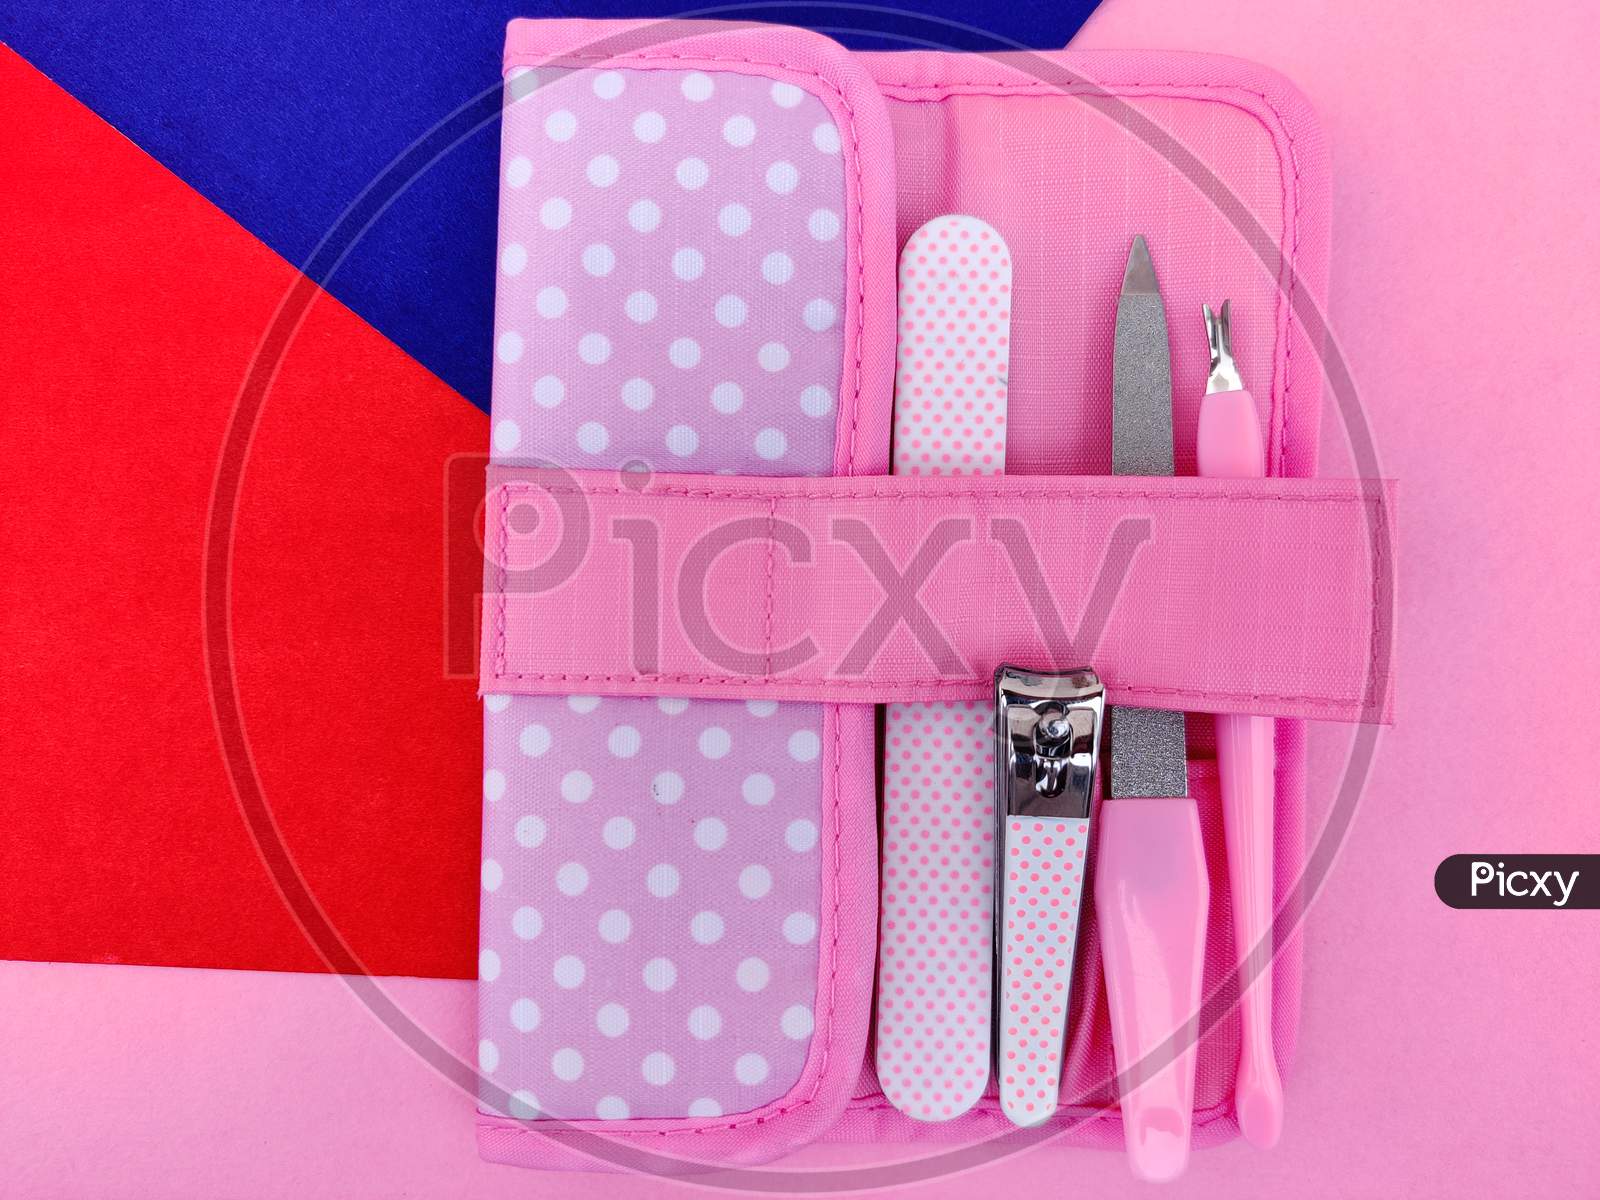 Pink Color Manicure Tools In Pouch Isolated On Pink Background.